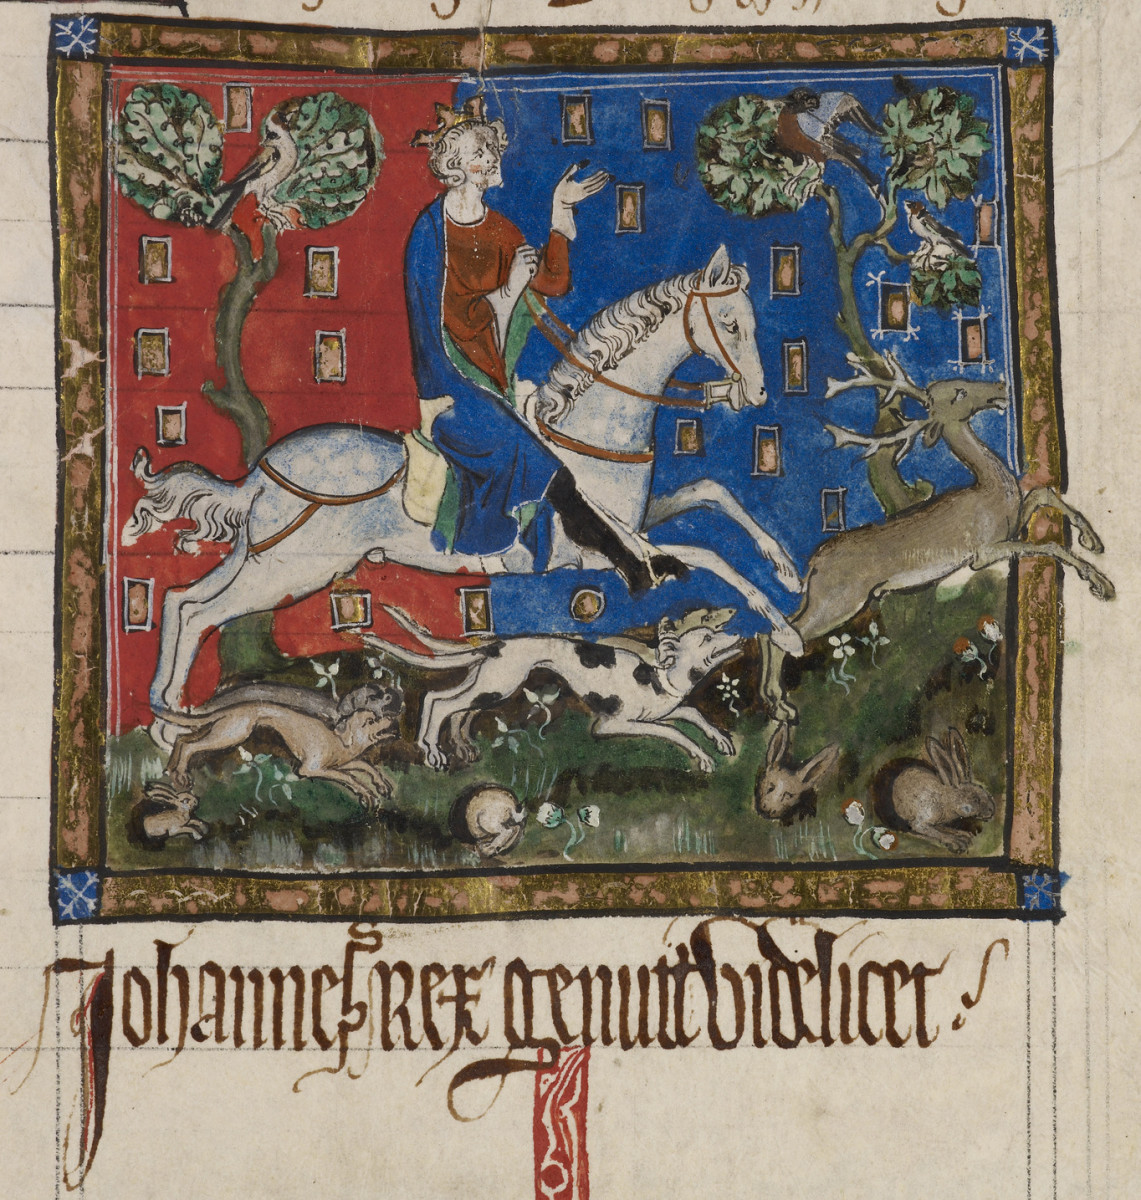 A depiction of King John hunting a stag with hounds (dating back to the 14th century).